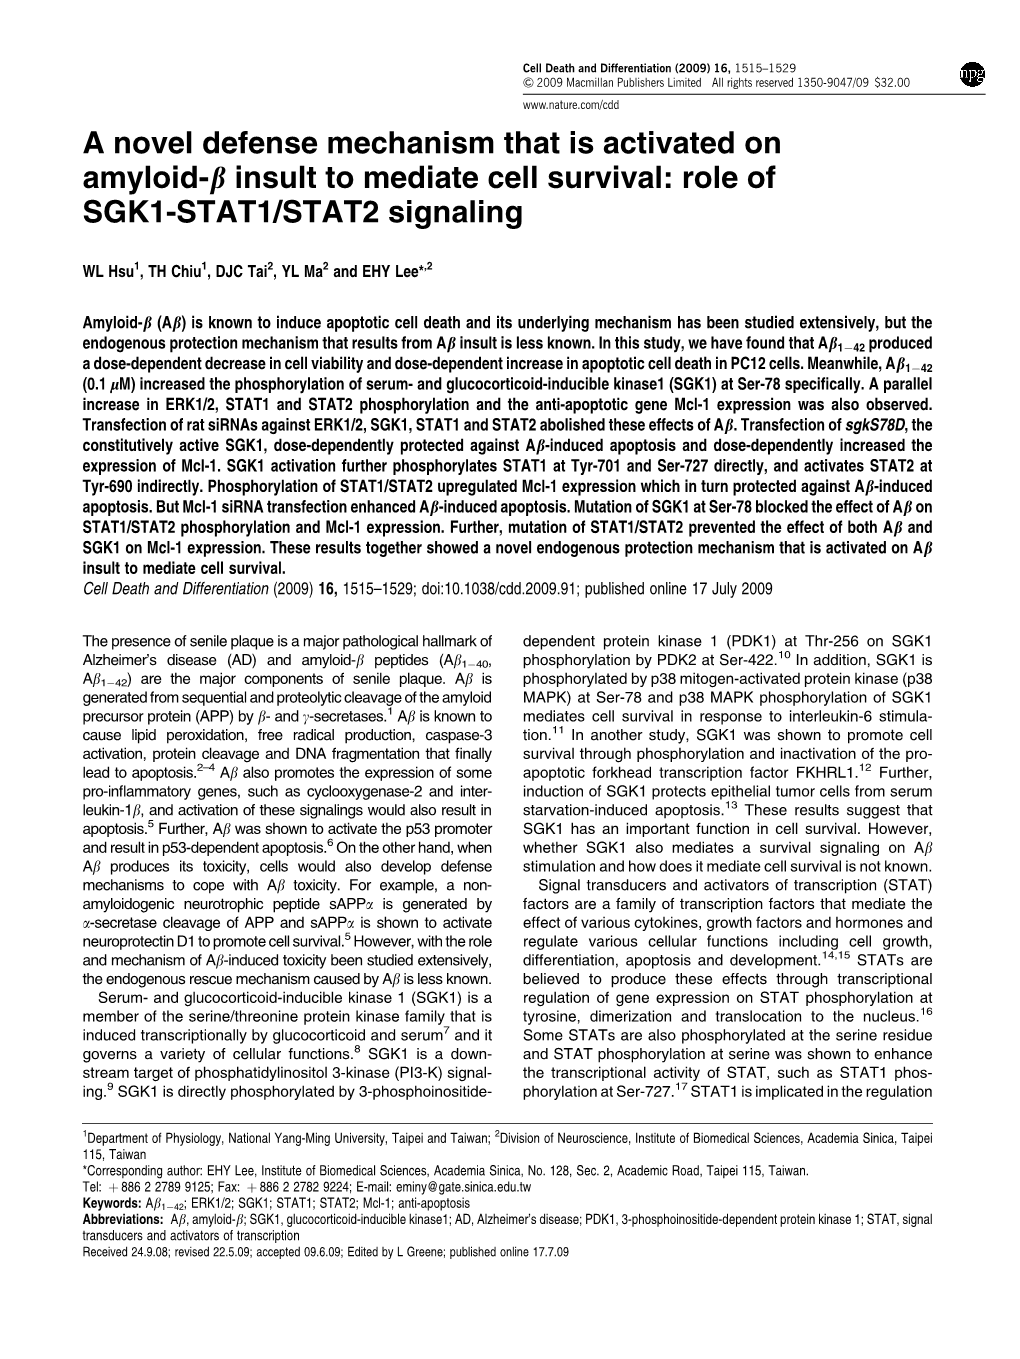 Insult to Mediate Cell Survival: Role of SGK1-STAT1&Sol